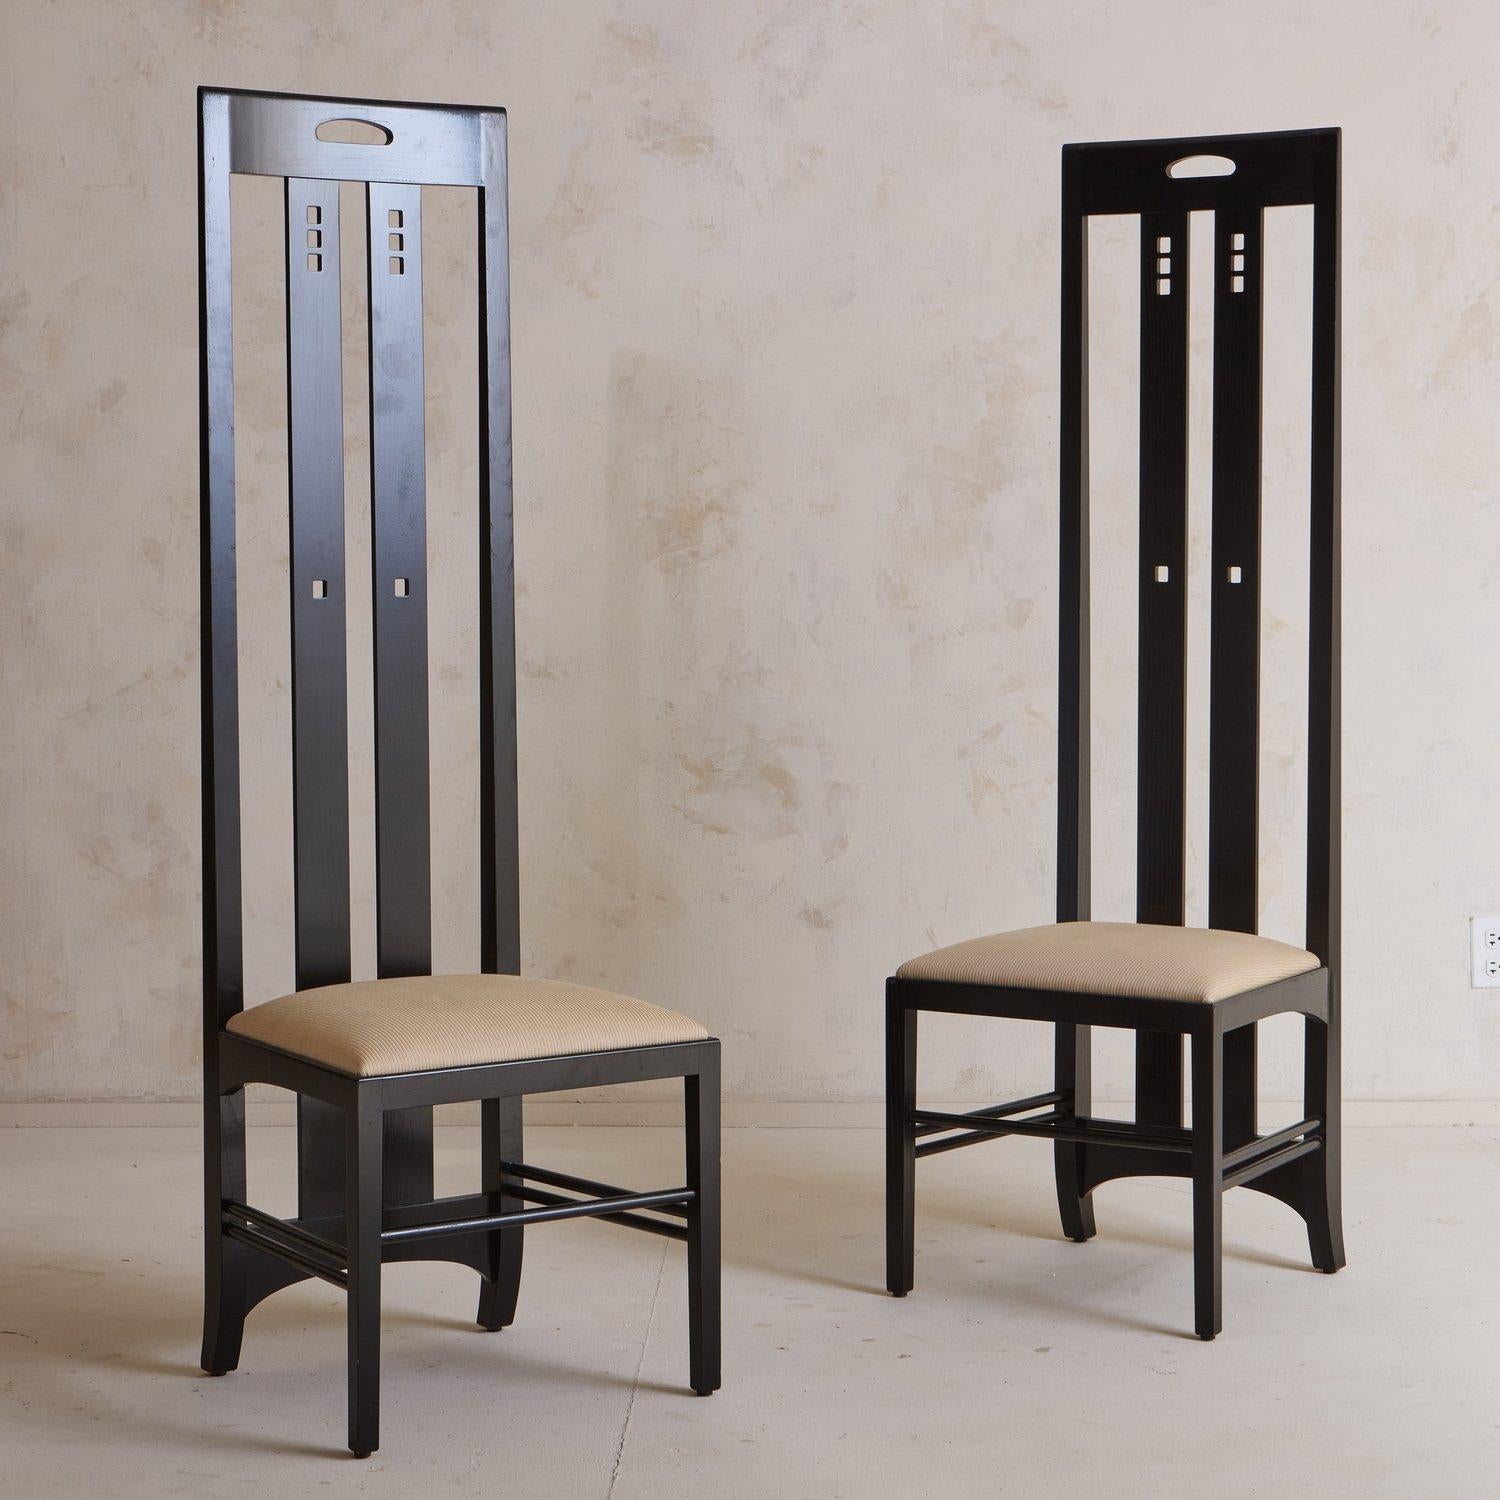 A pair of 1970s Ingram dining chairs attributed to Charles Mackintosh for Cassina. These chairs were constructed with ash wood and have a lacquered ebony finish. They feature dramatically high backs with geometric cutout details and an upholstered